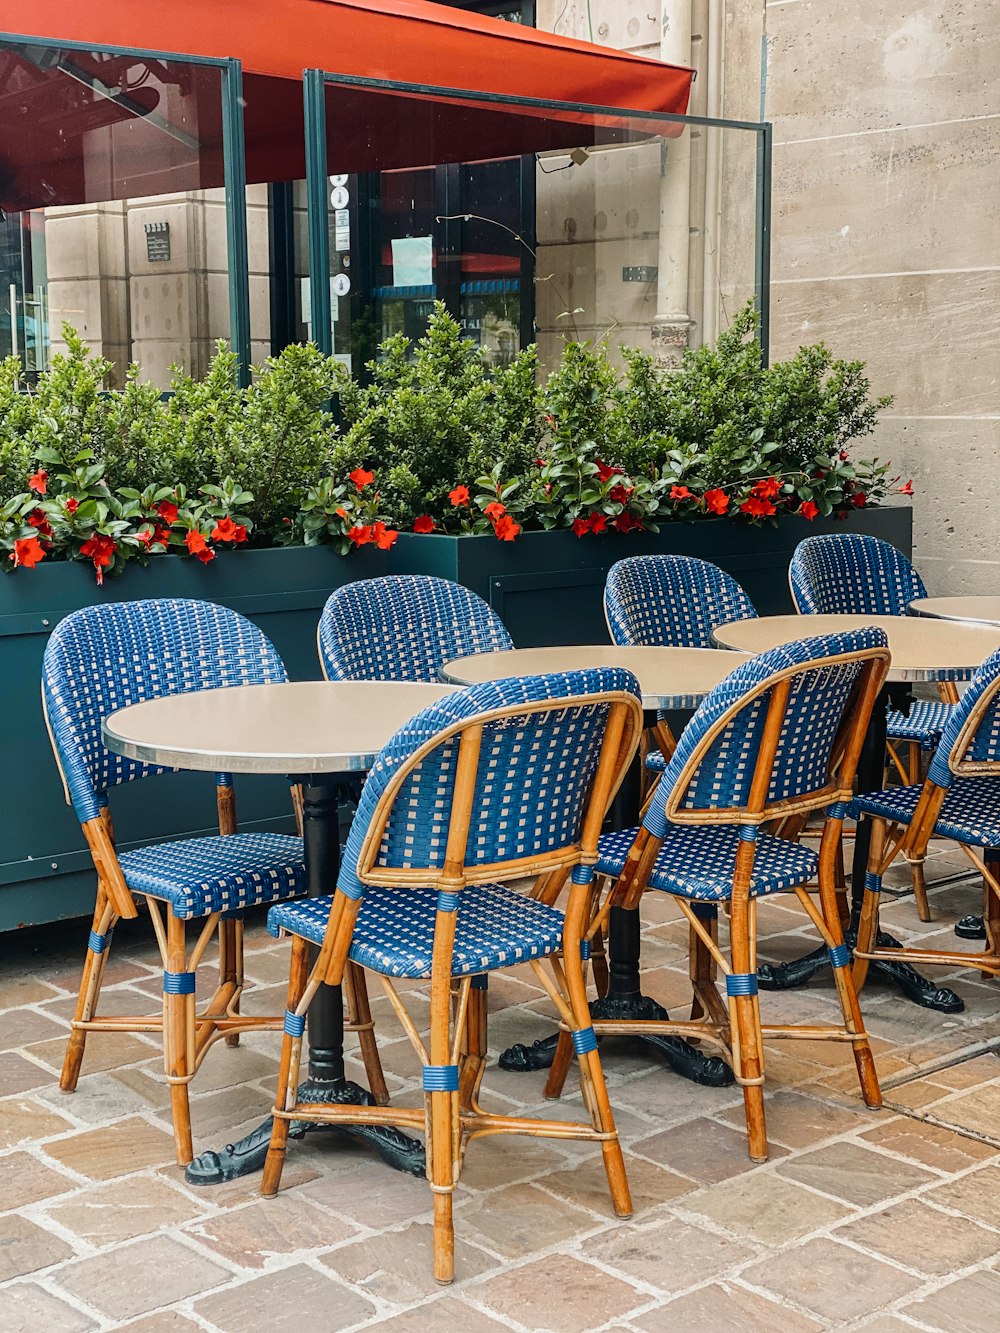 a row of blue chairs sitting next to each other